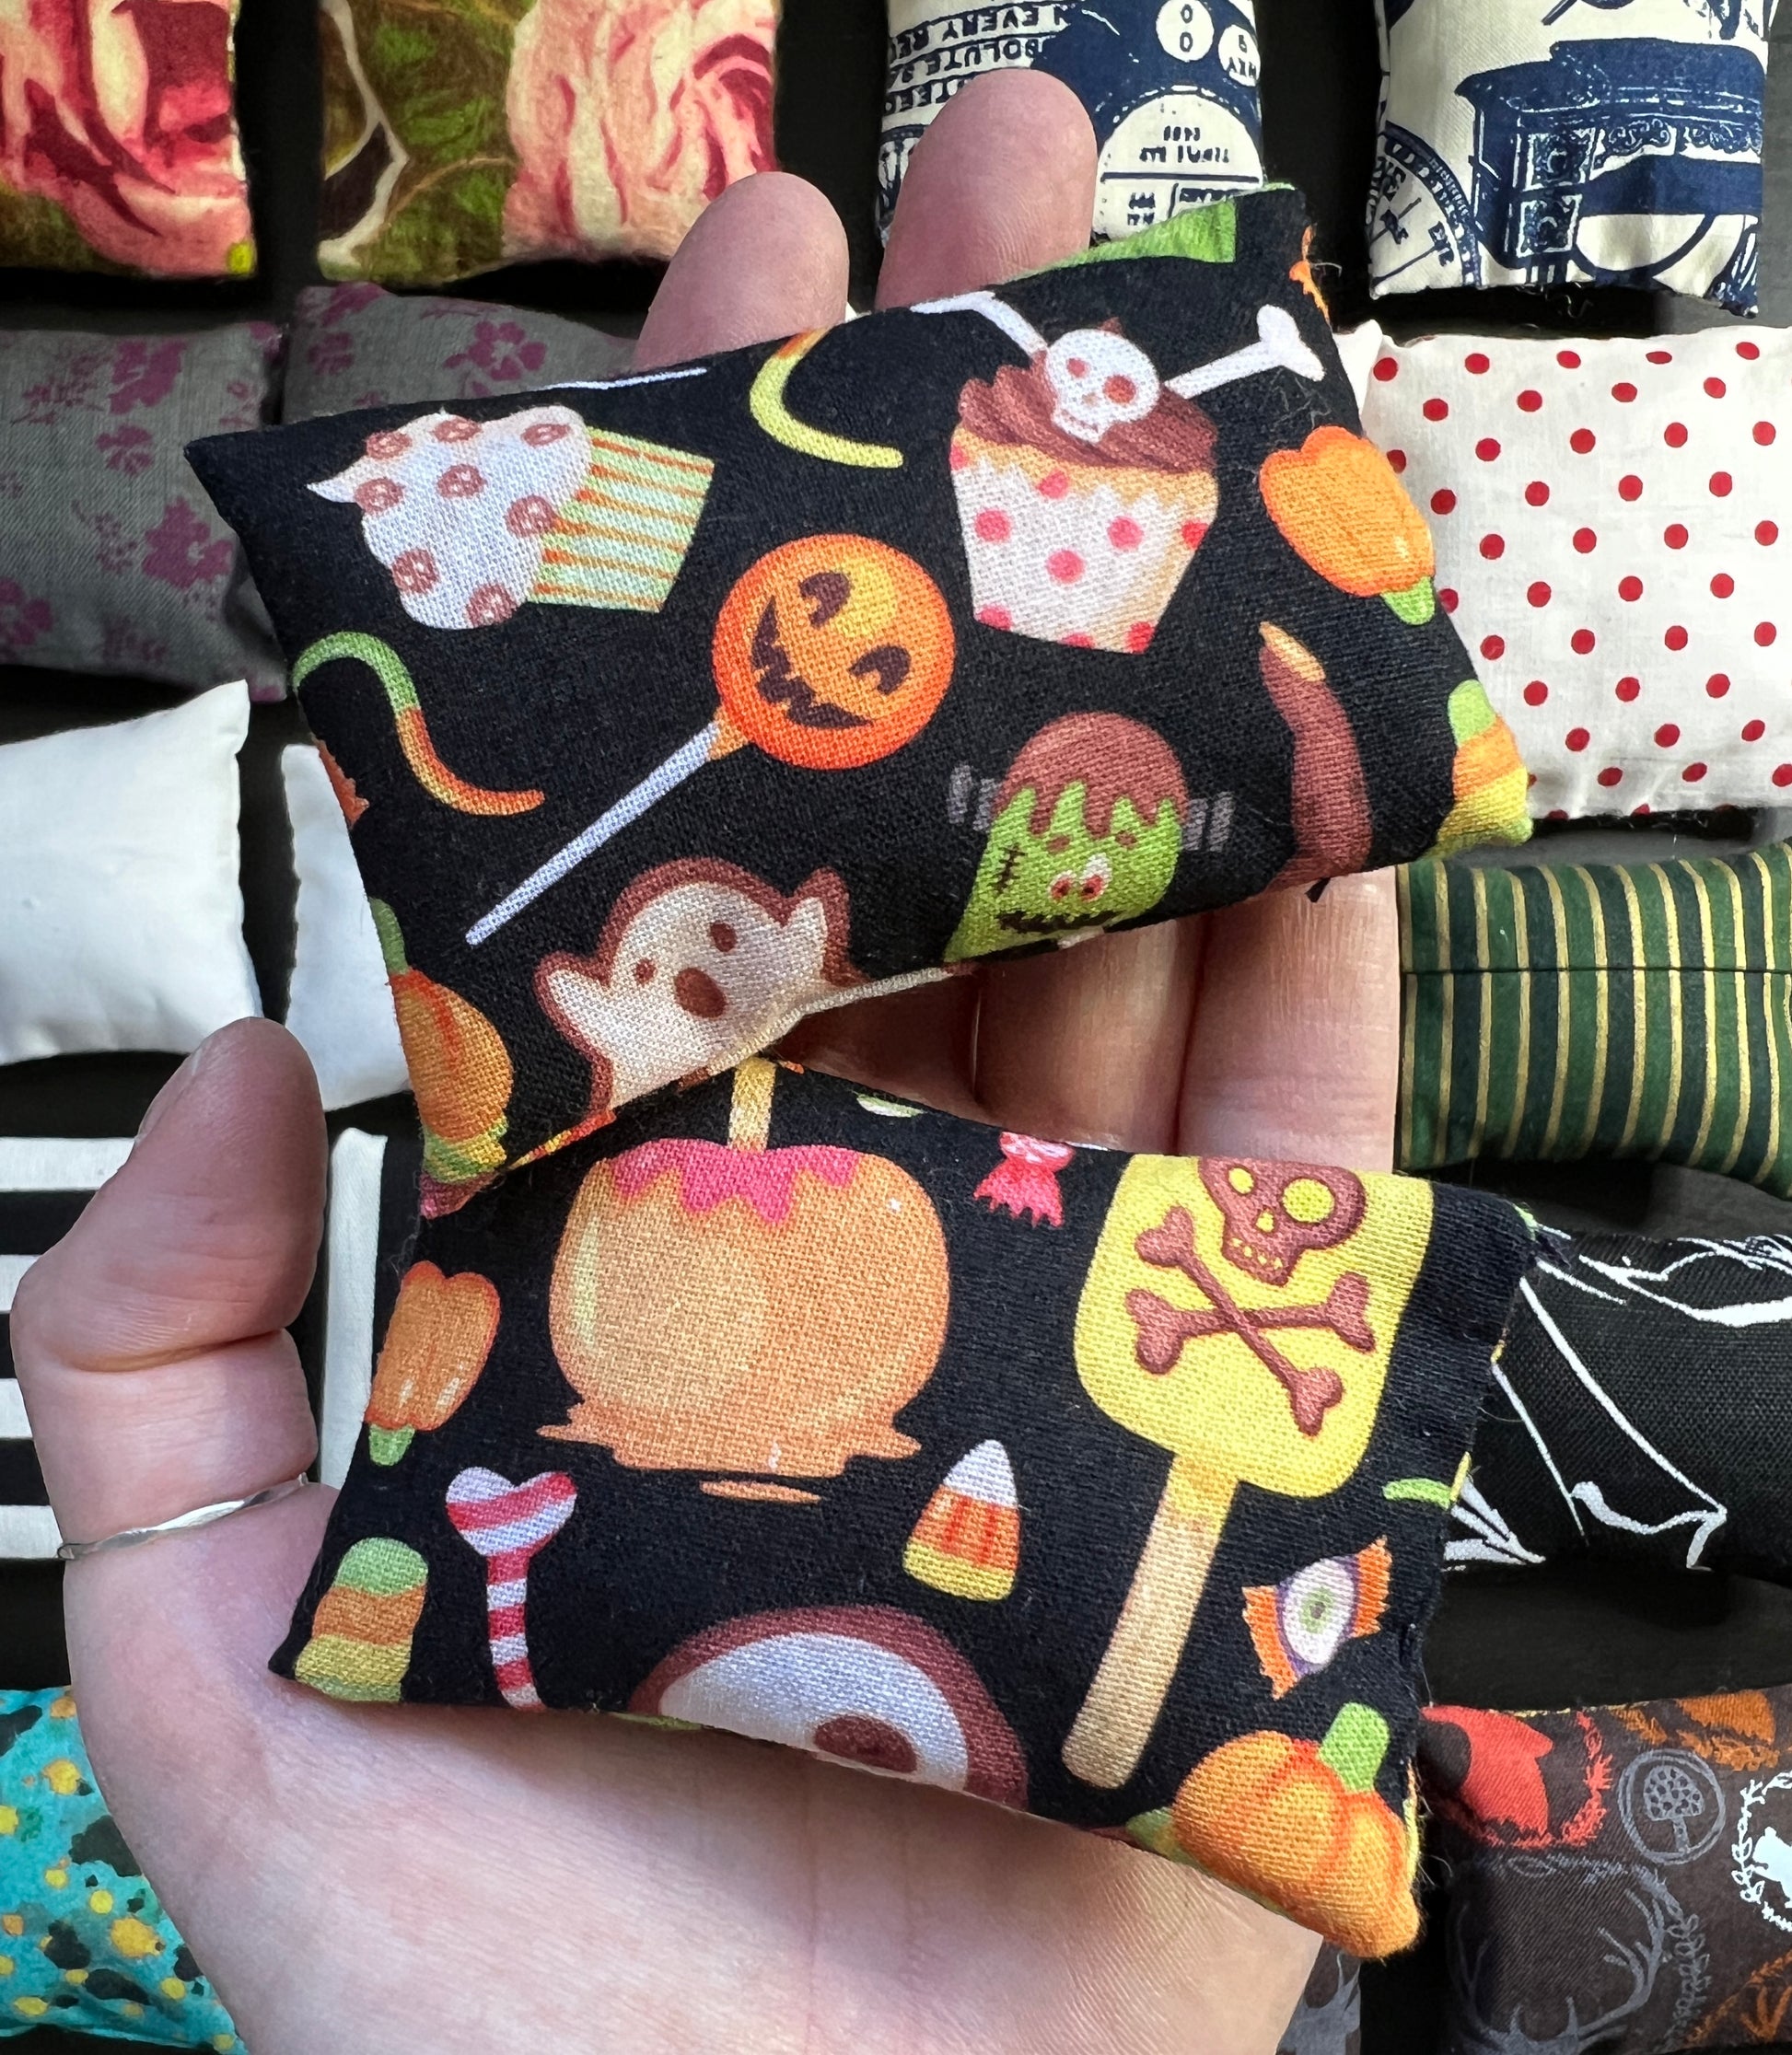 a hand holds a pair of Barbie pillows, for scale. various halloween candy graphics on a black background. other pillows in distance